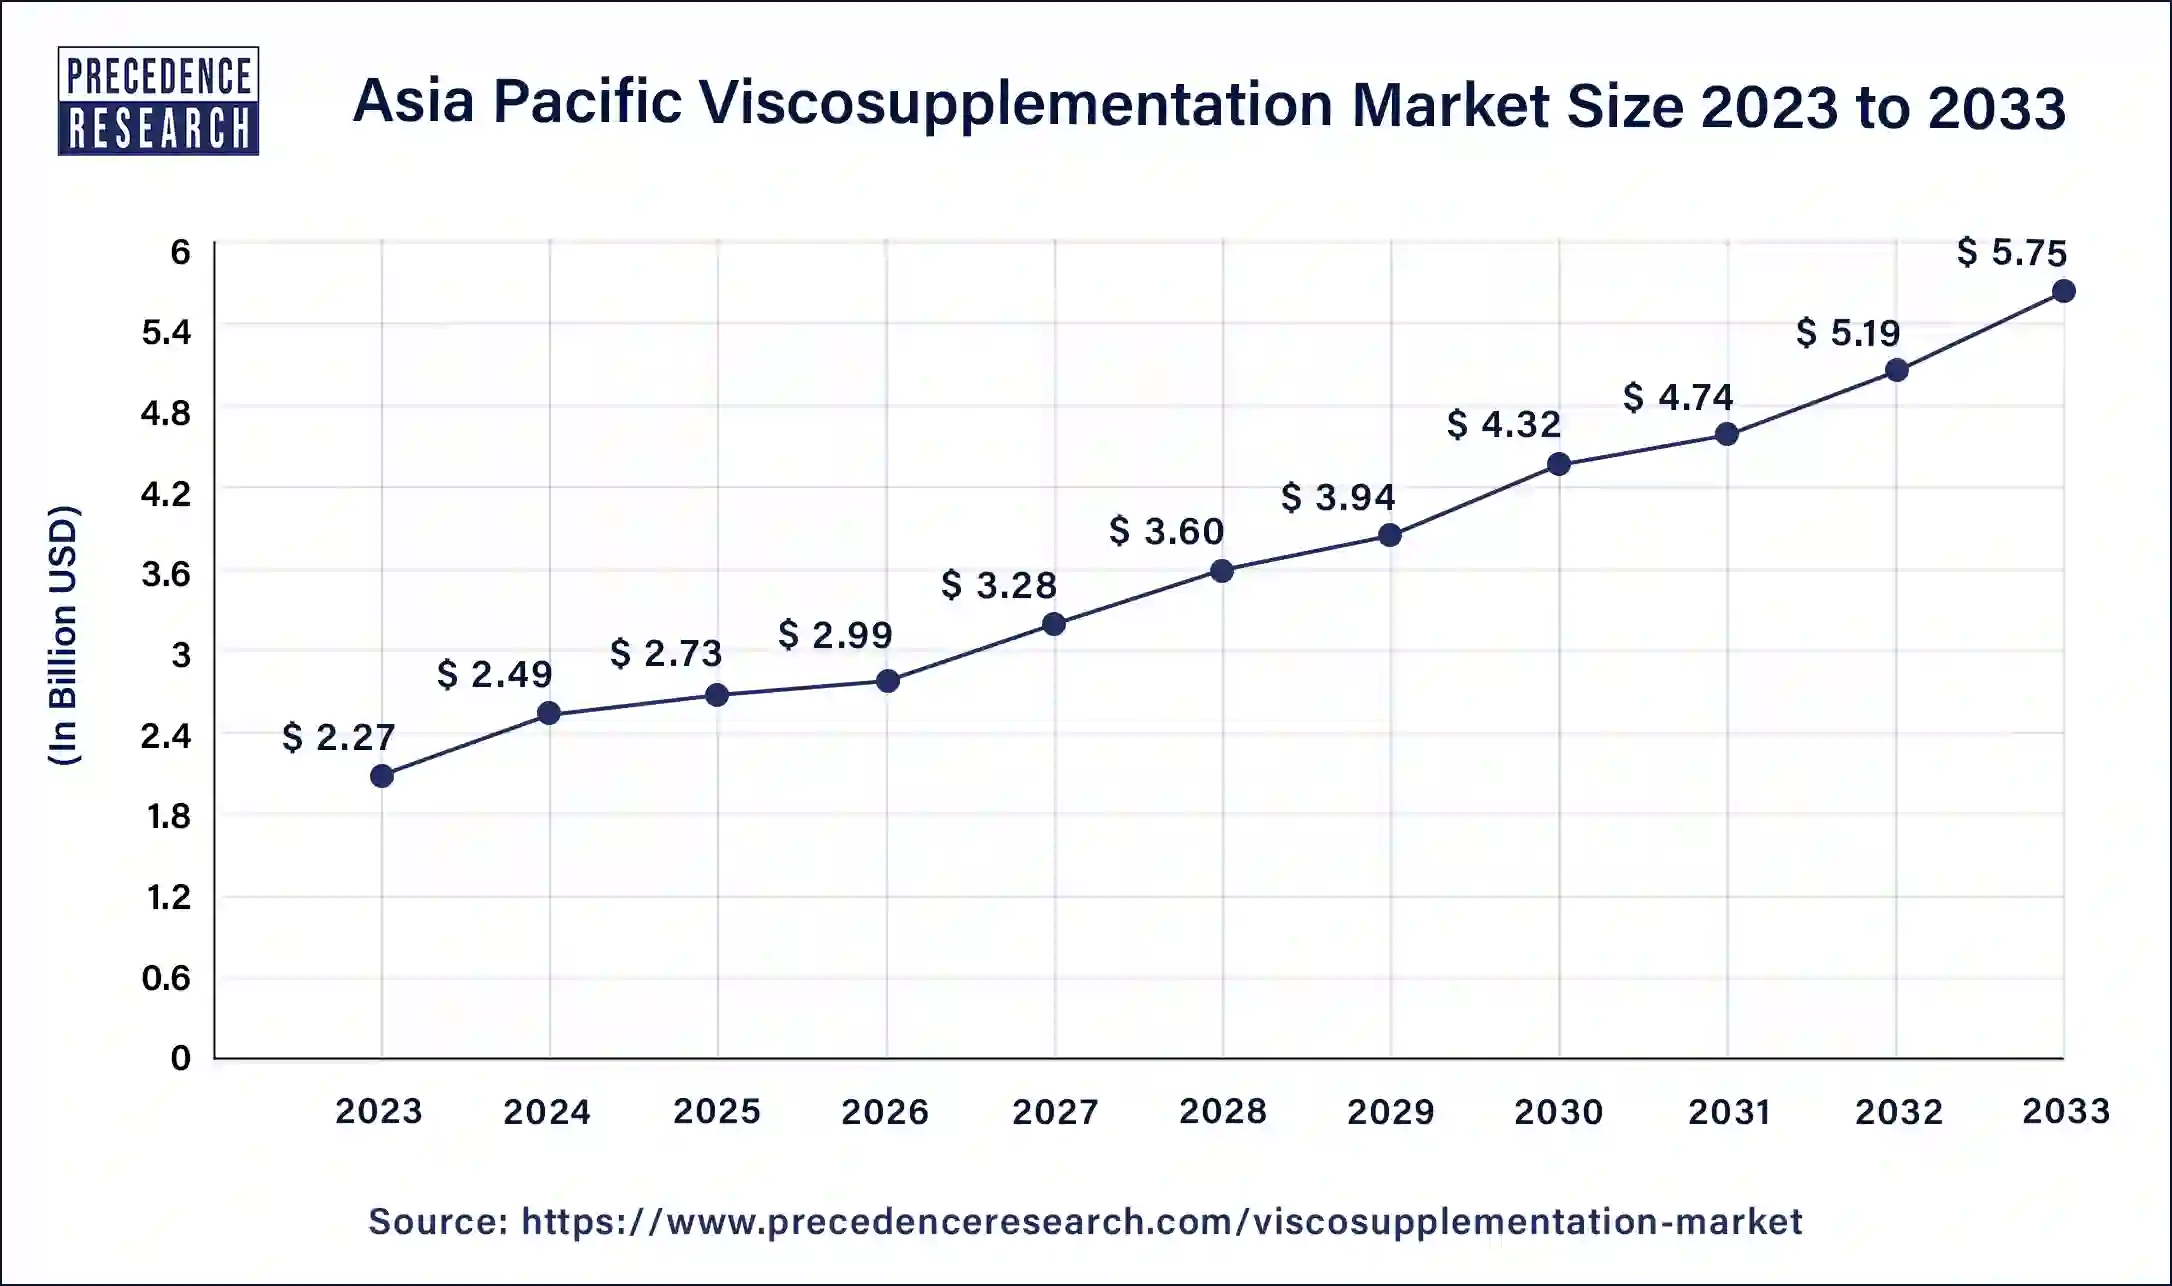 Asia Pacific Viscosupplementation Market Size 2024 to 2033